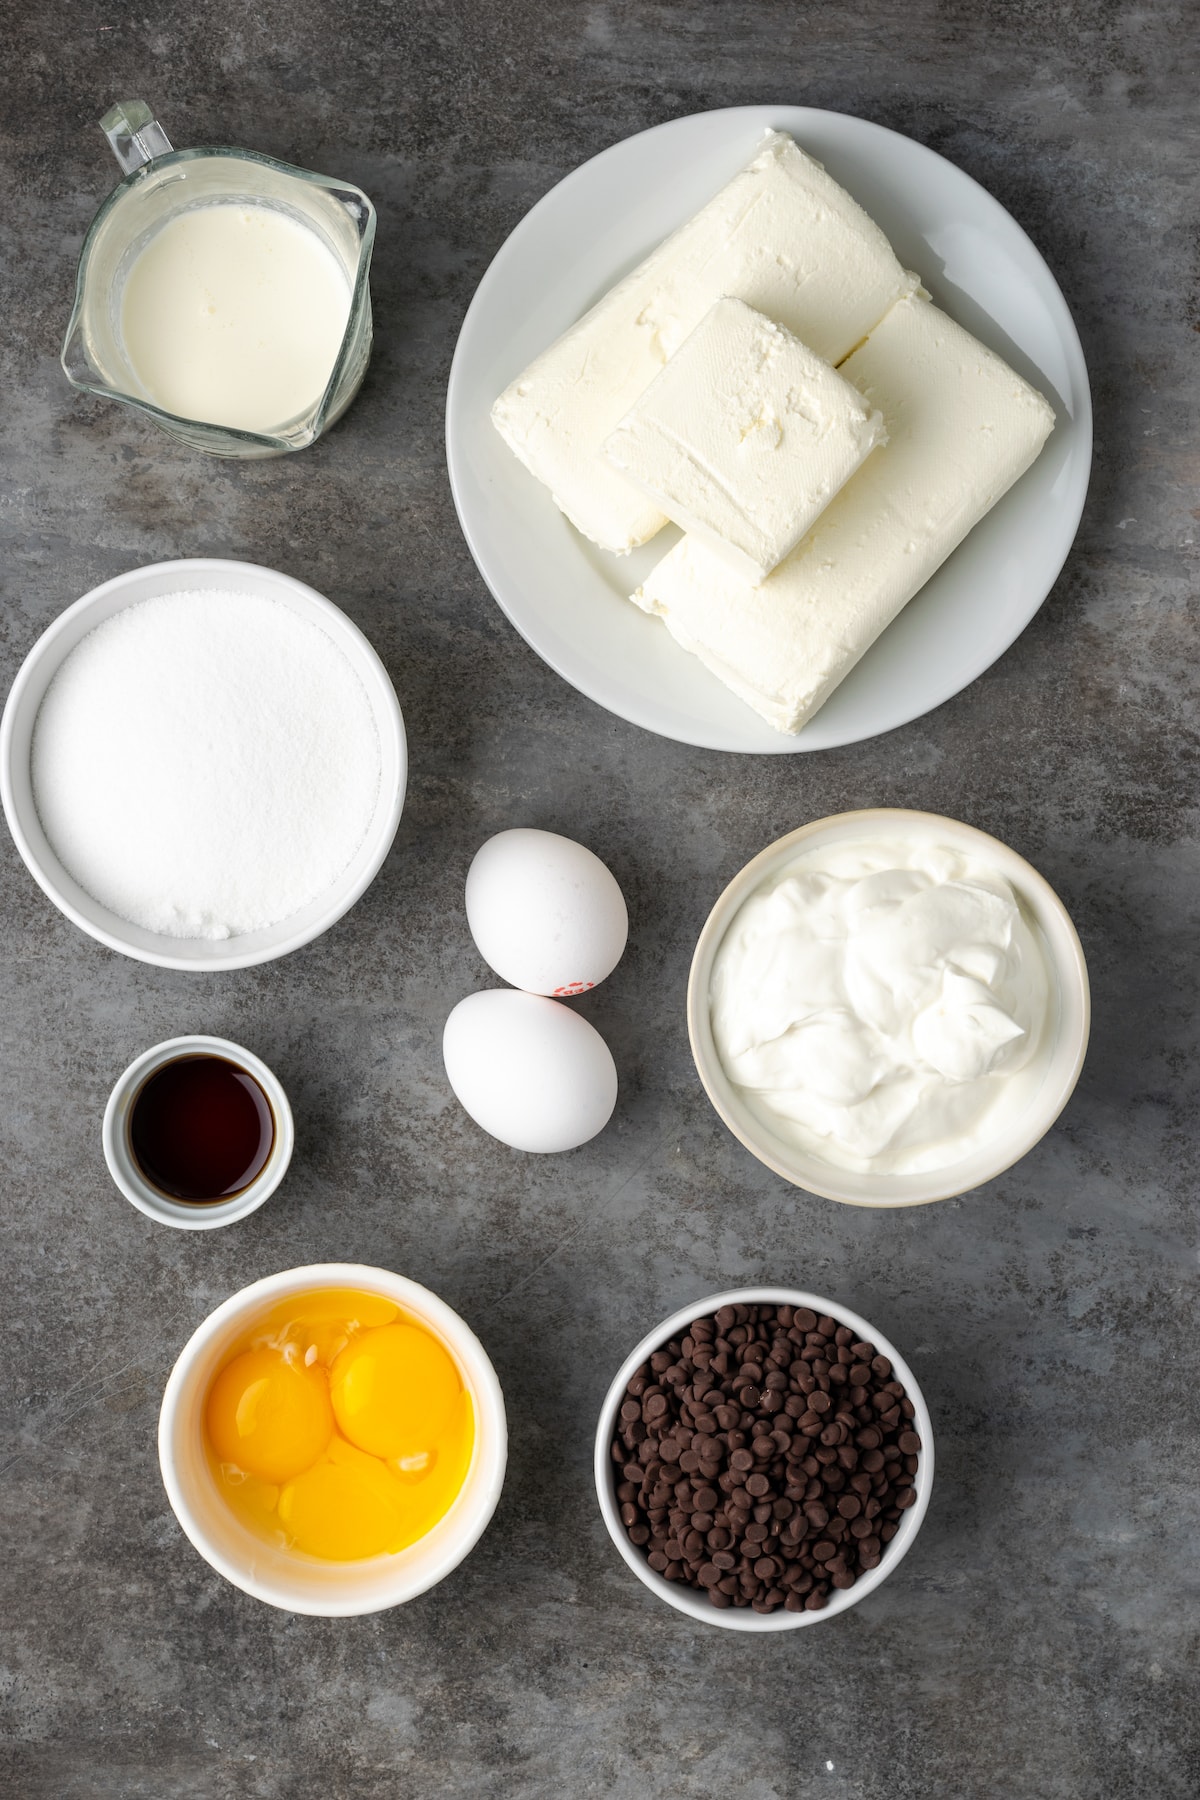 The ingredients for the cannoli cheesecake filling.